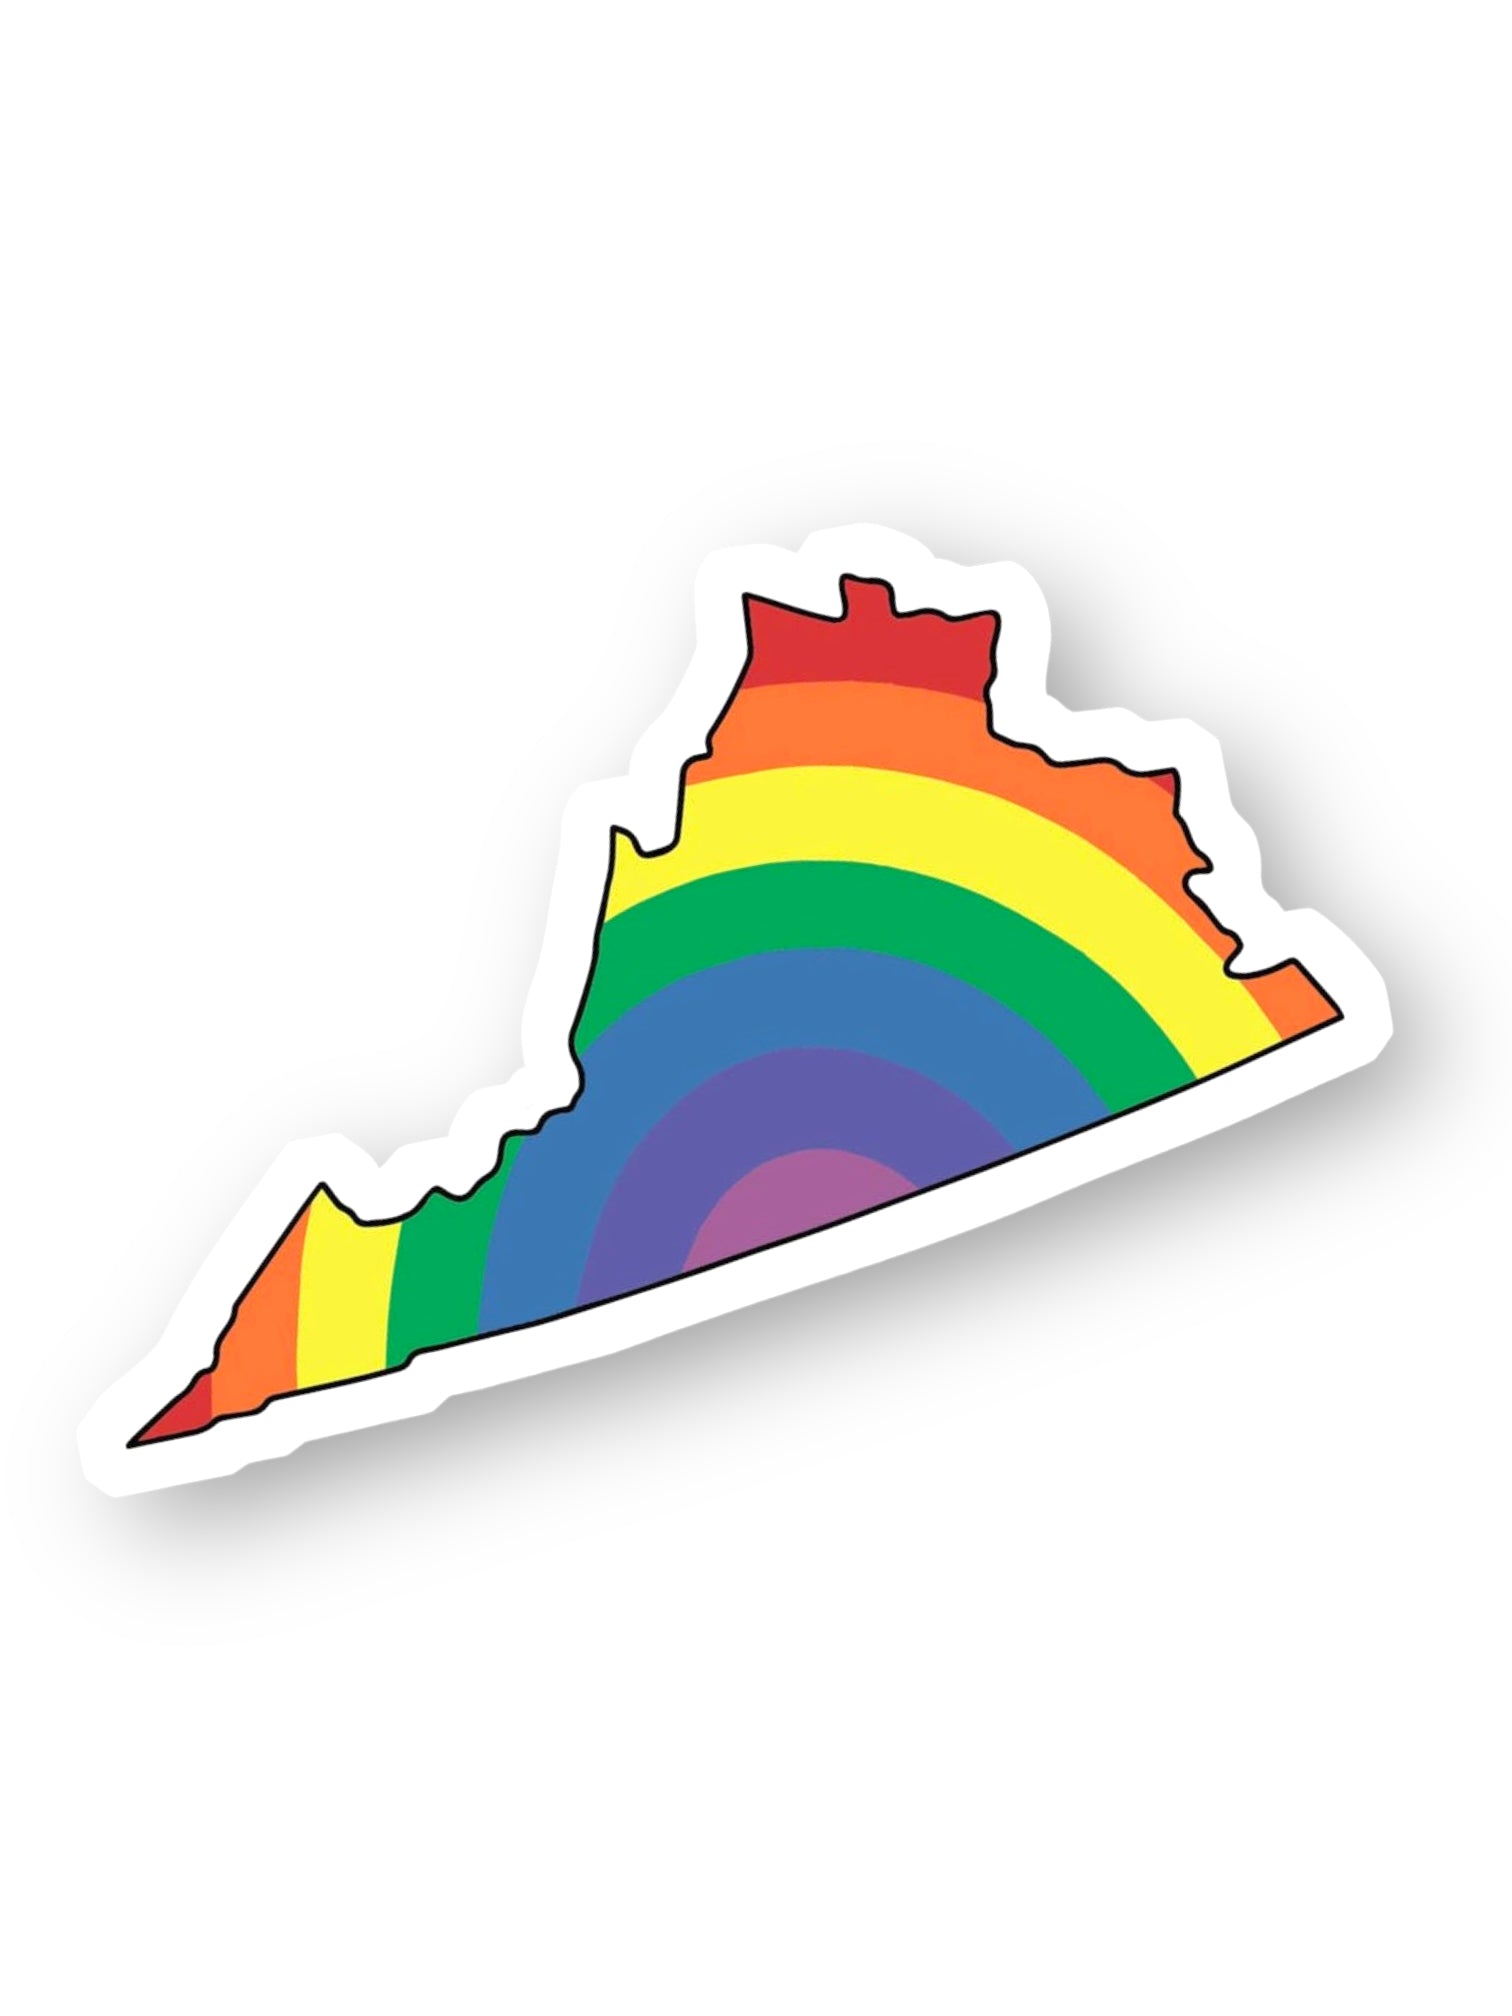 Rainbow Virginia VA State Sticker by Big Moods, Sold by Le Monkey House